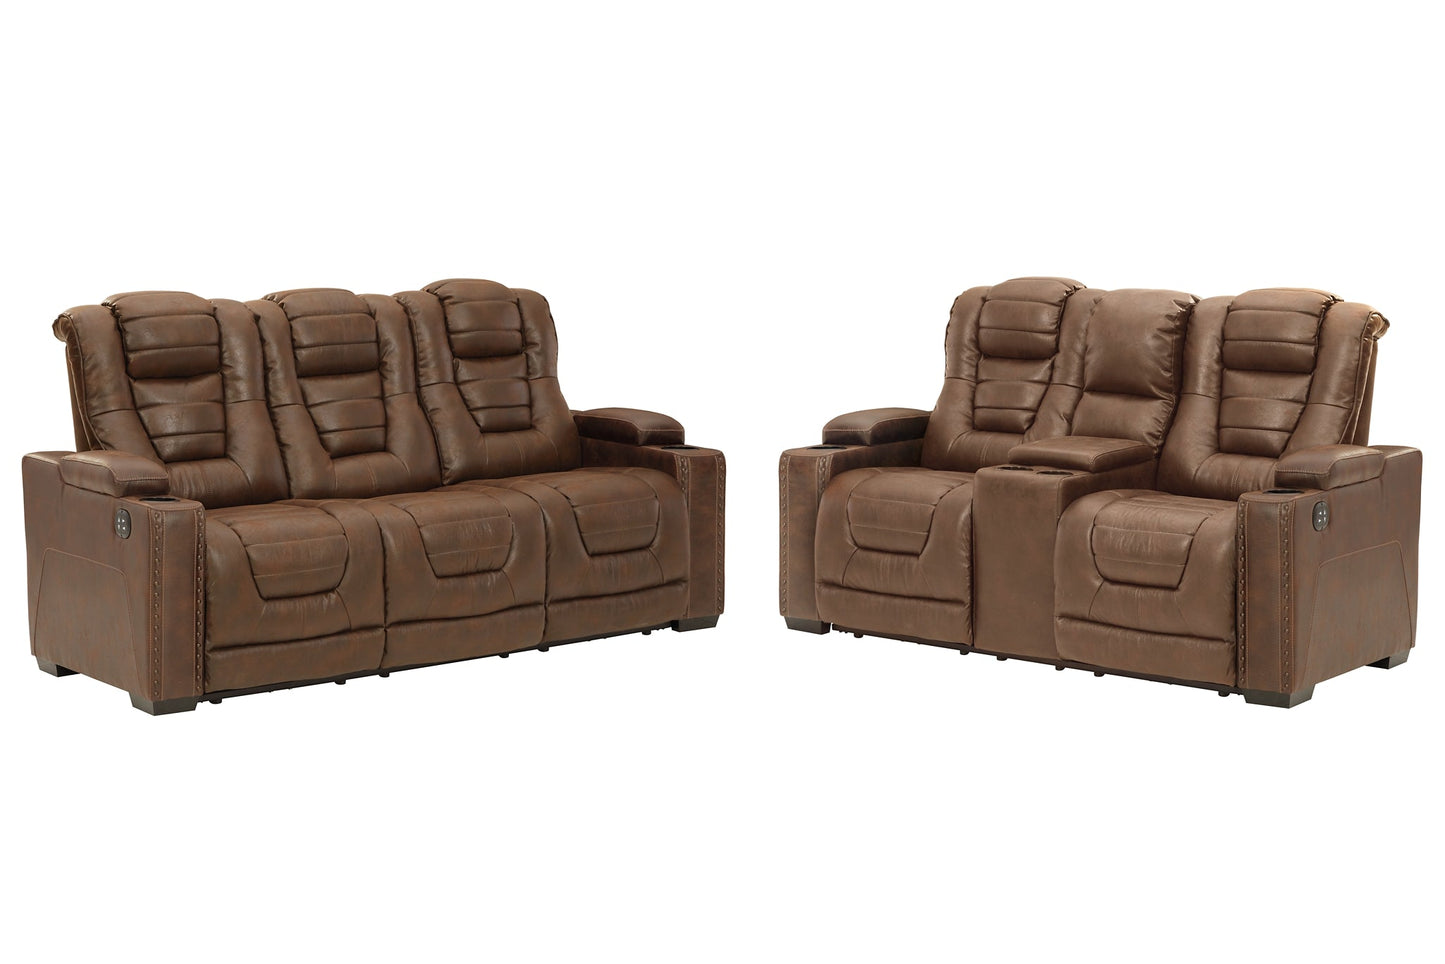 Owner's Box Sofa and Loveseat at Walker Mattress and Furniture Locations in Cedar Park and Belton TX.